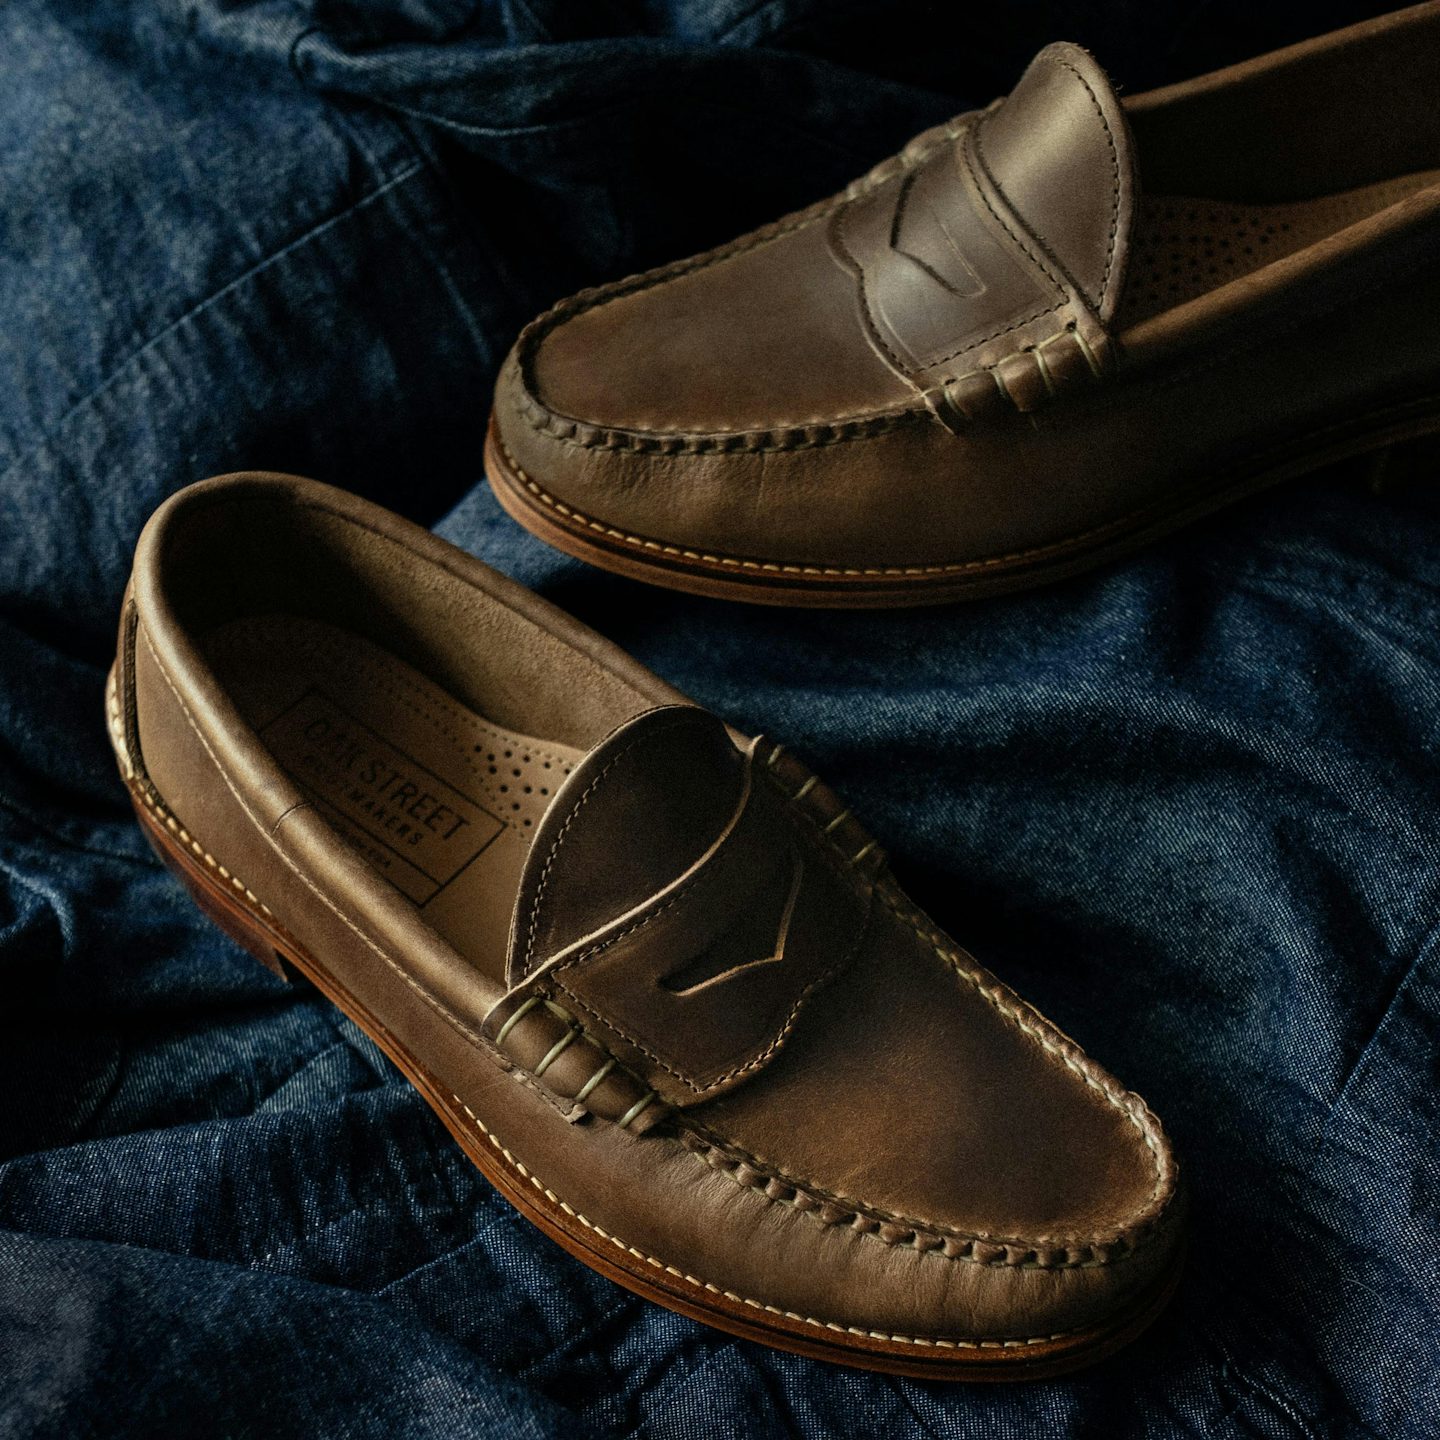 Beefroll Penny Loafer - Natural 